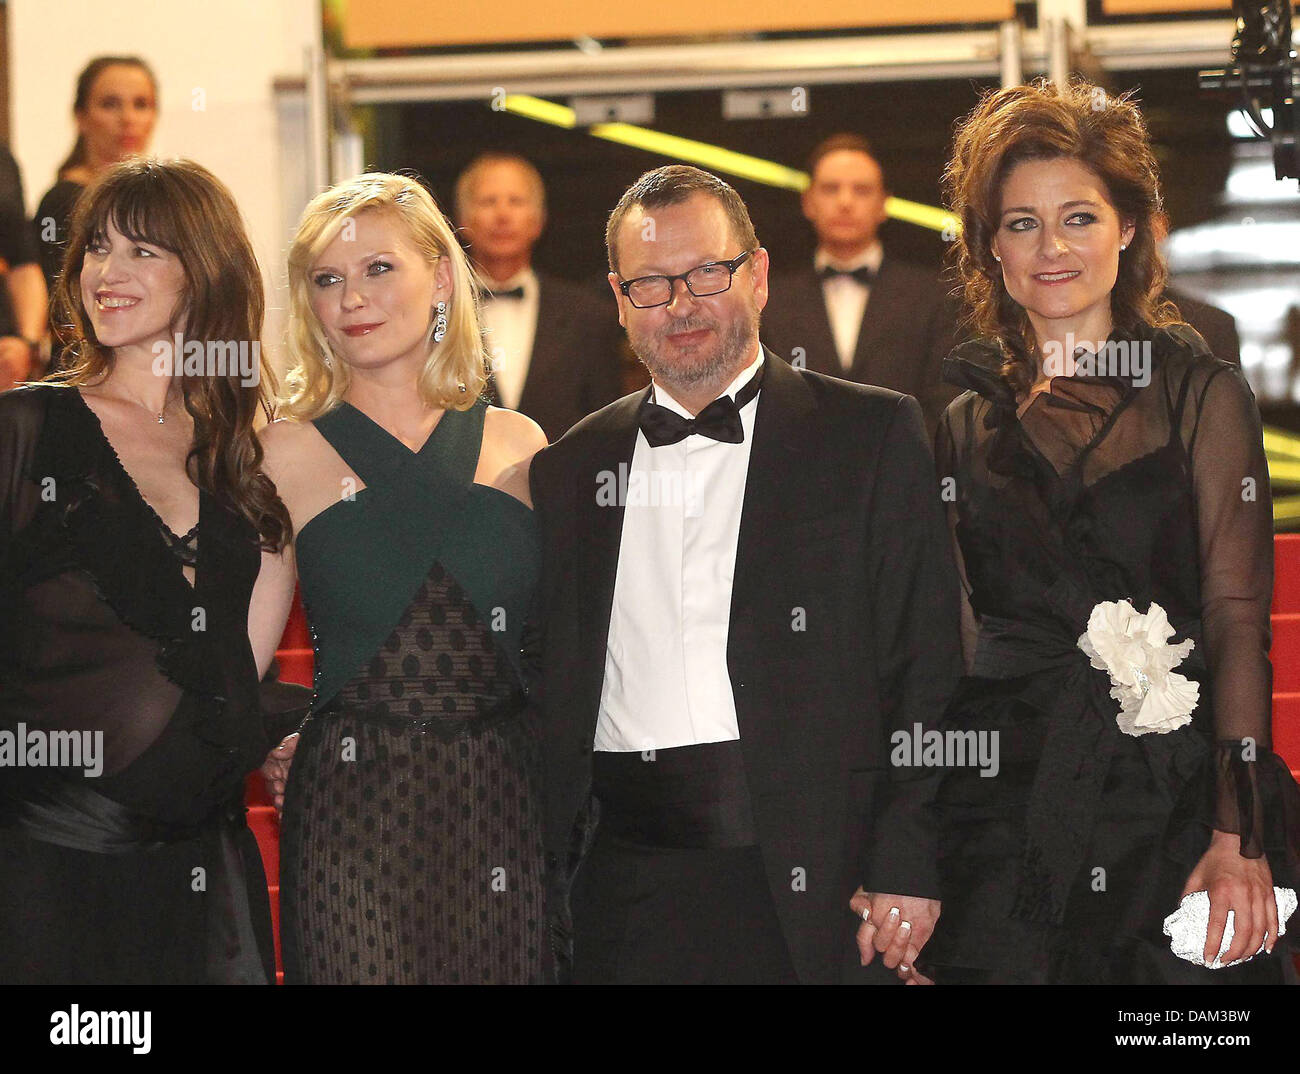 (dpa file) - A file picture dated 18 May 2011 shows Danish director Lars Von Trier (2nd to R) arriving for the screening of his movie 'Melancholia' during the 64th Cannes Film Festival in Cannes, France. Von Trier stirred controversy with remarks about his being a Nazi at a press conference on his movie in Cannes on 18 May 2011. After the press office of the Cannes Film Festival is Stock Photo